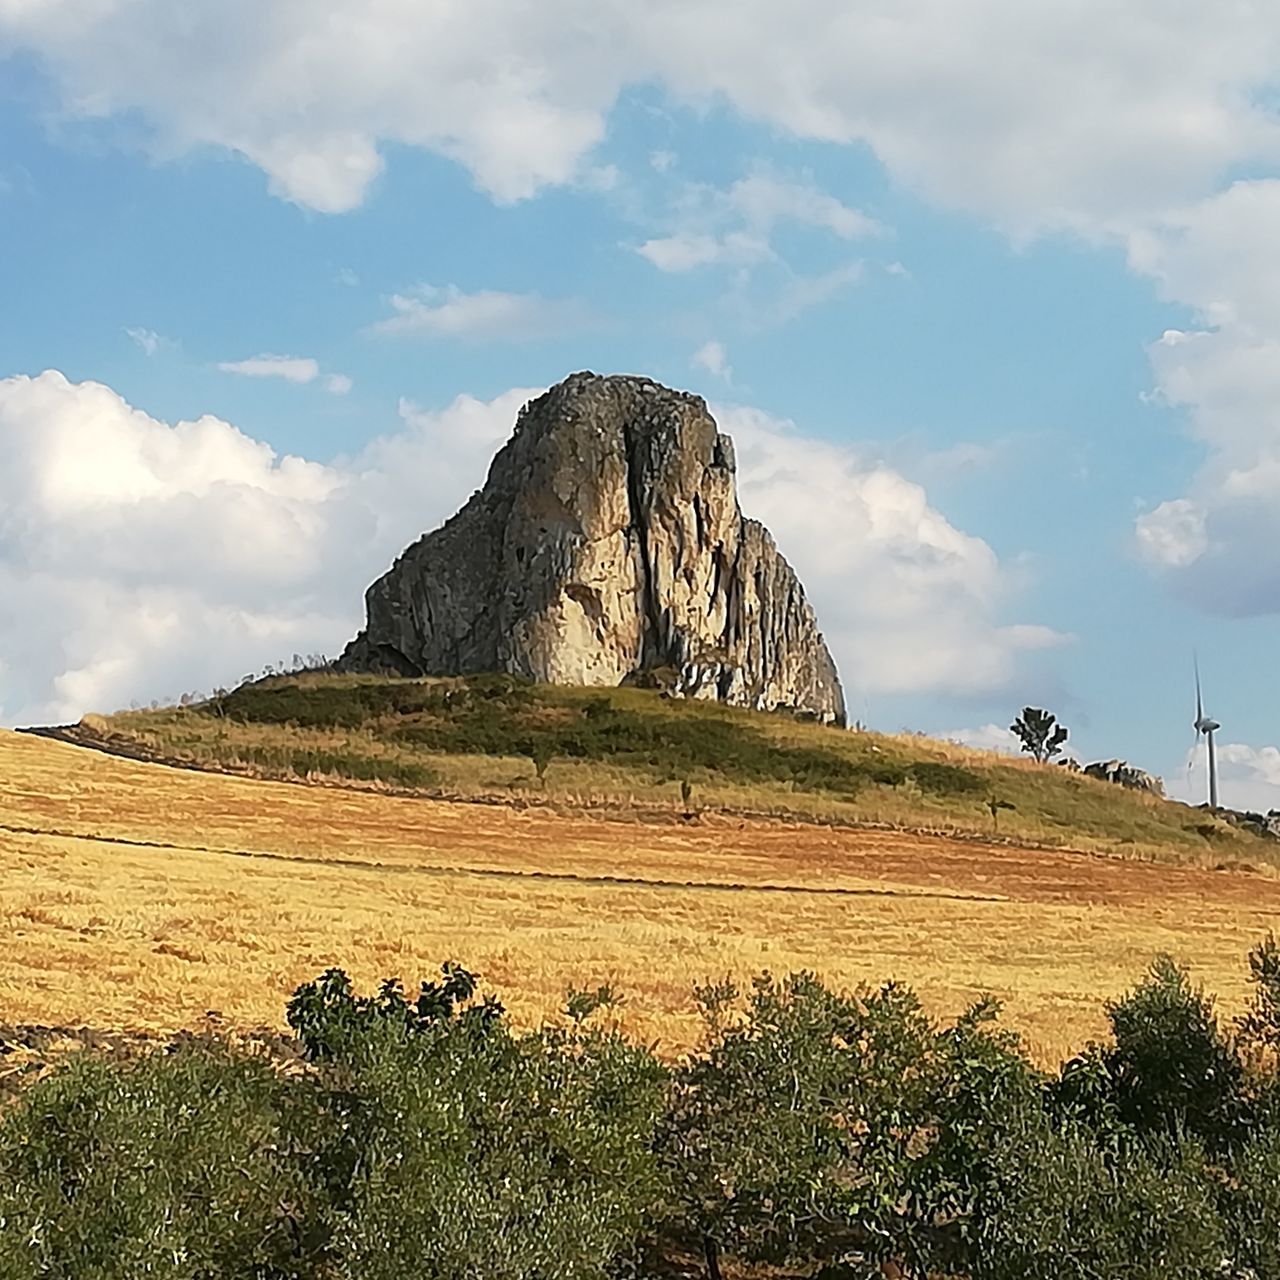 SCENIC VIEW OF ROCK FORMATIONS ON LANDSCAPE AGAINST SKY